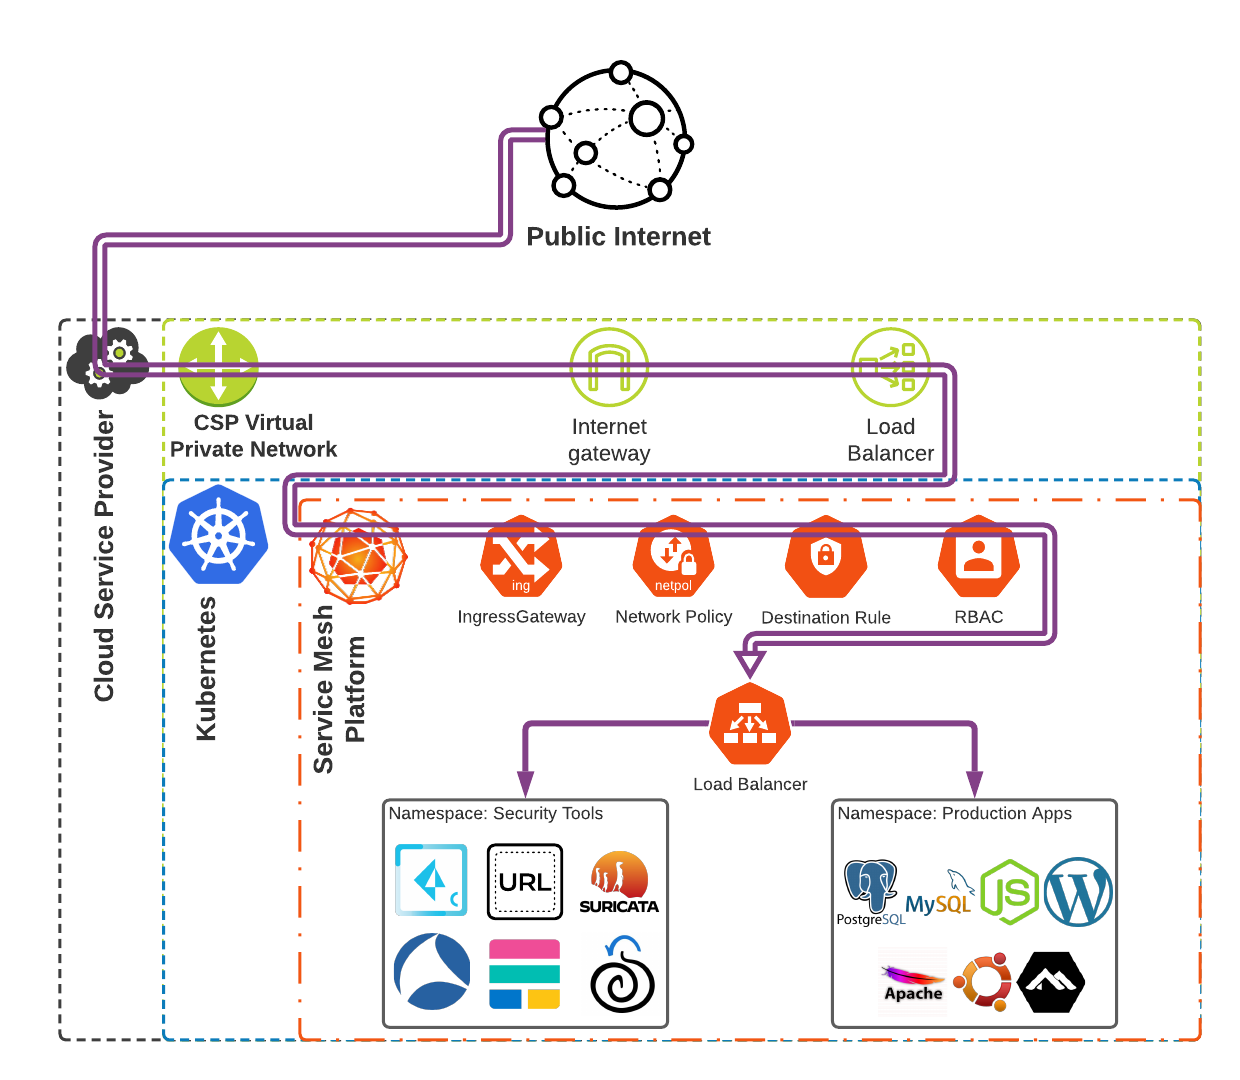 Example of how a security-focused service mesh architecture can increase visibility within K8s clusters. Image shows relationships of cloud service provider (CSP virtual private network, internet gateway, load balancer), to Kubernetes and a Service Mesh Platfroom (IngressGateway, Network Policy, Destination Rule, RBAC, Load Balancer. It also shows how security tools and production apps could fit into the picture. 